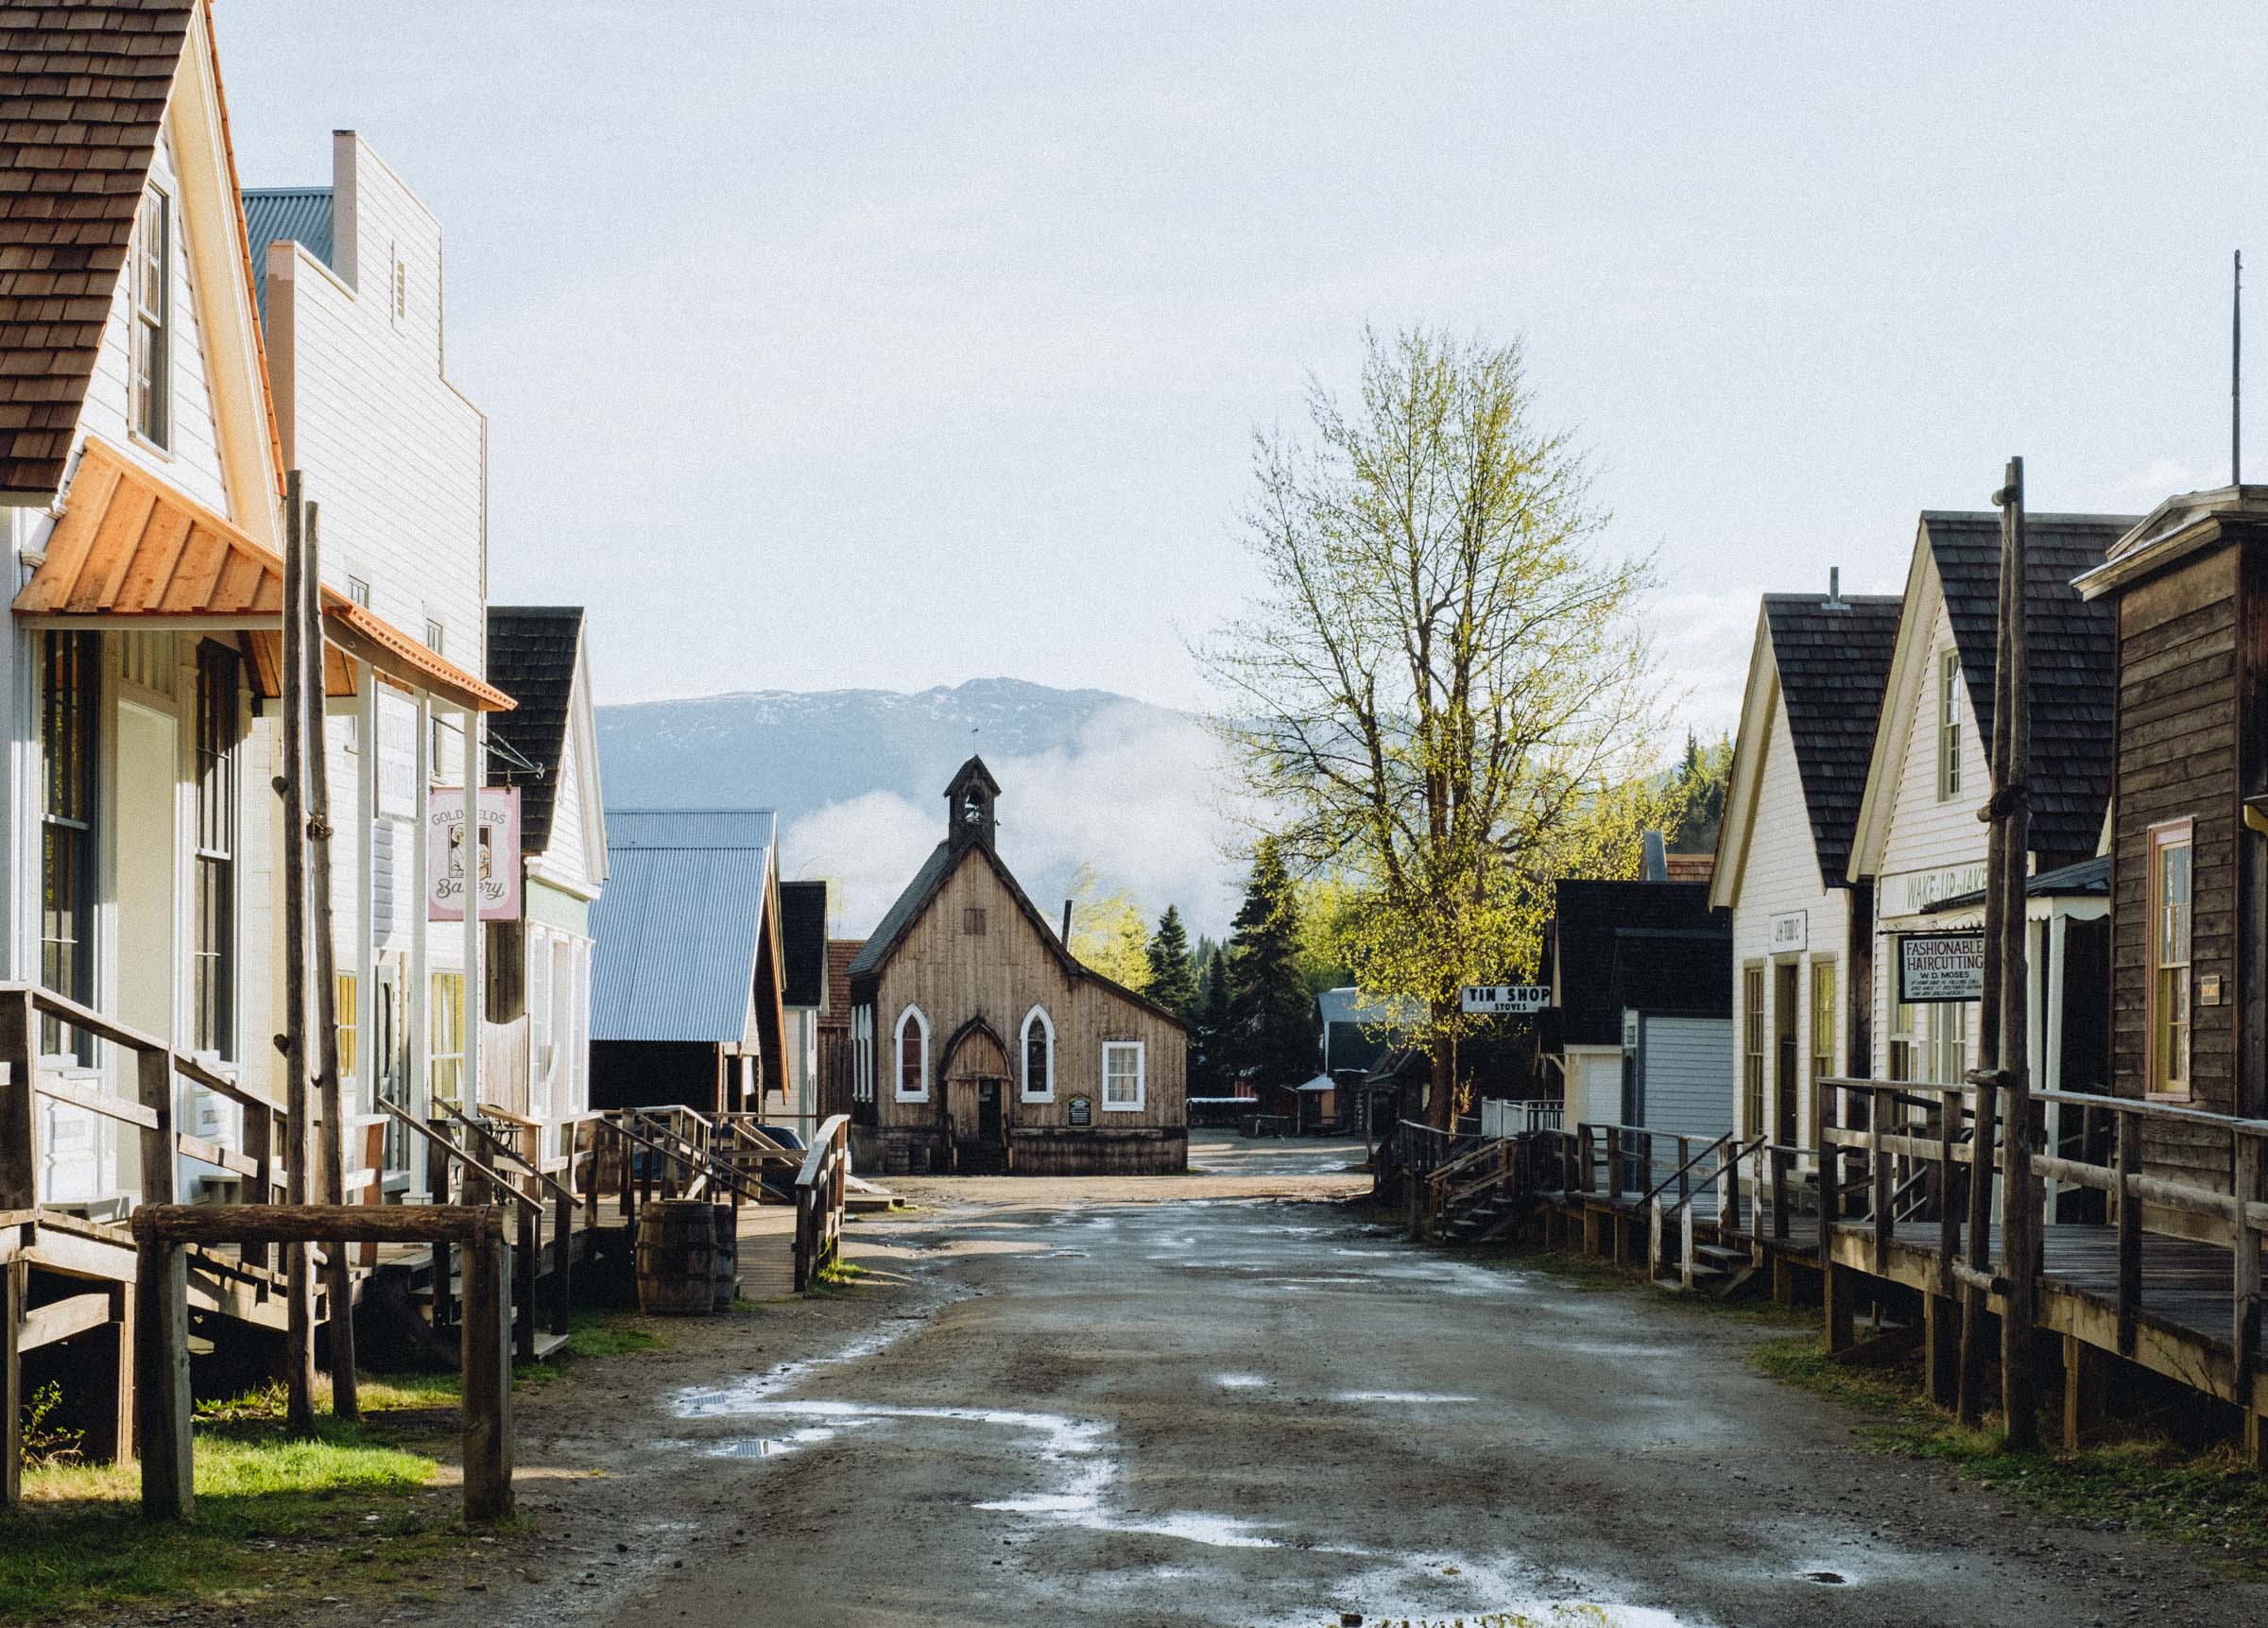 Strolling the muddy streets of old Barkerville